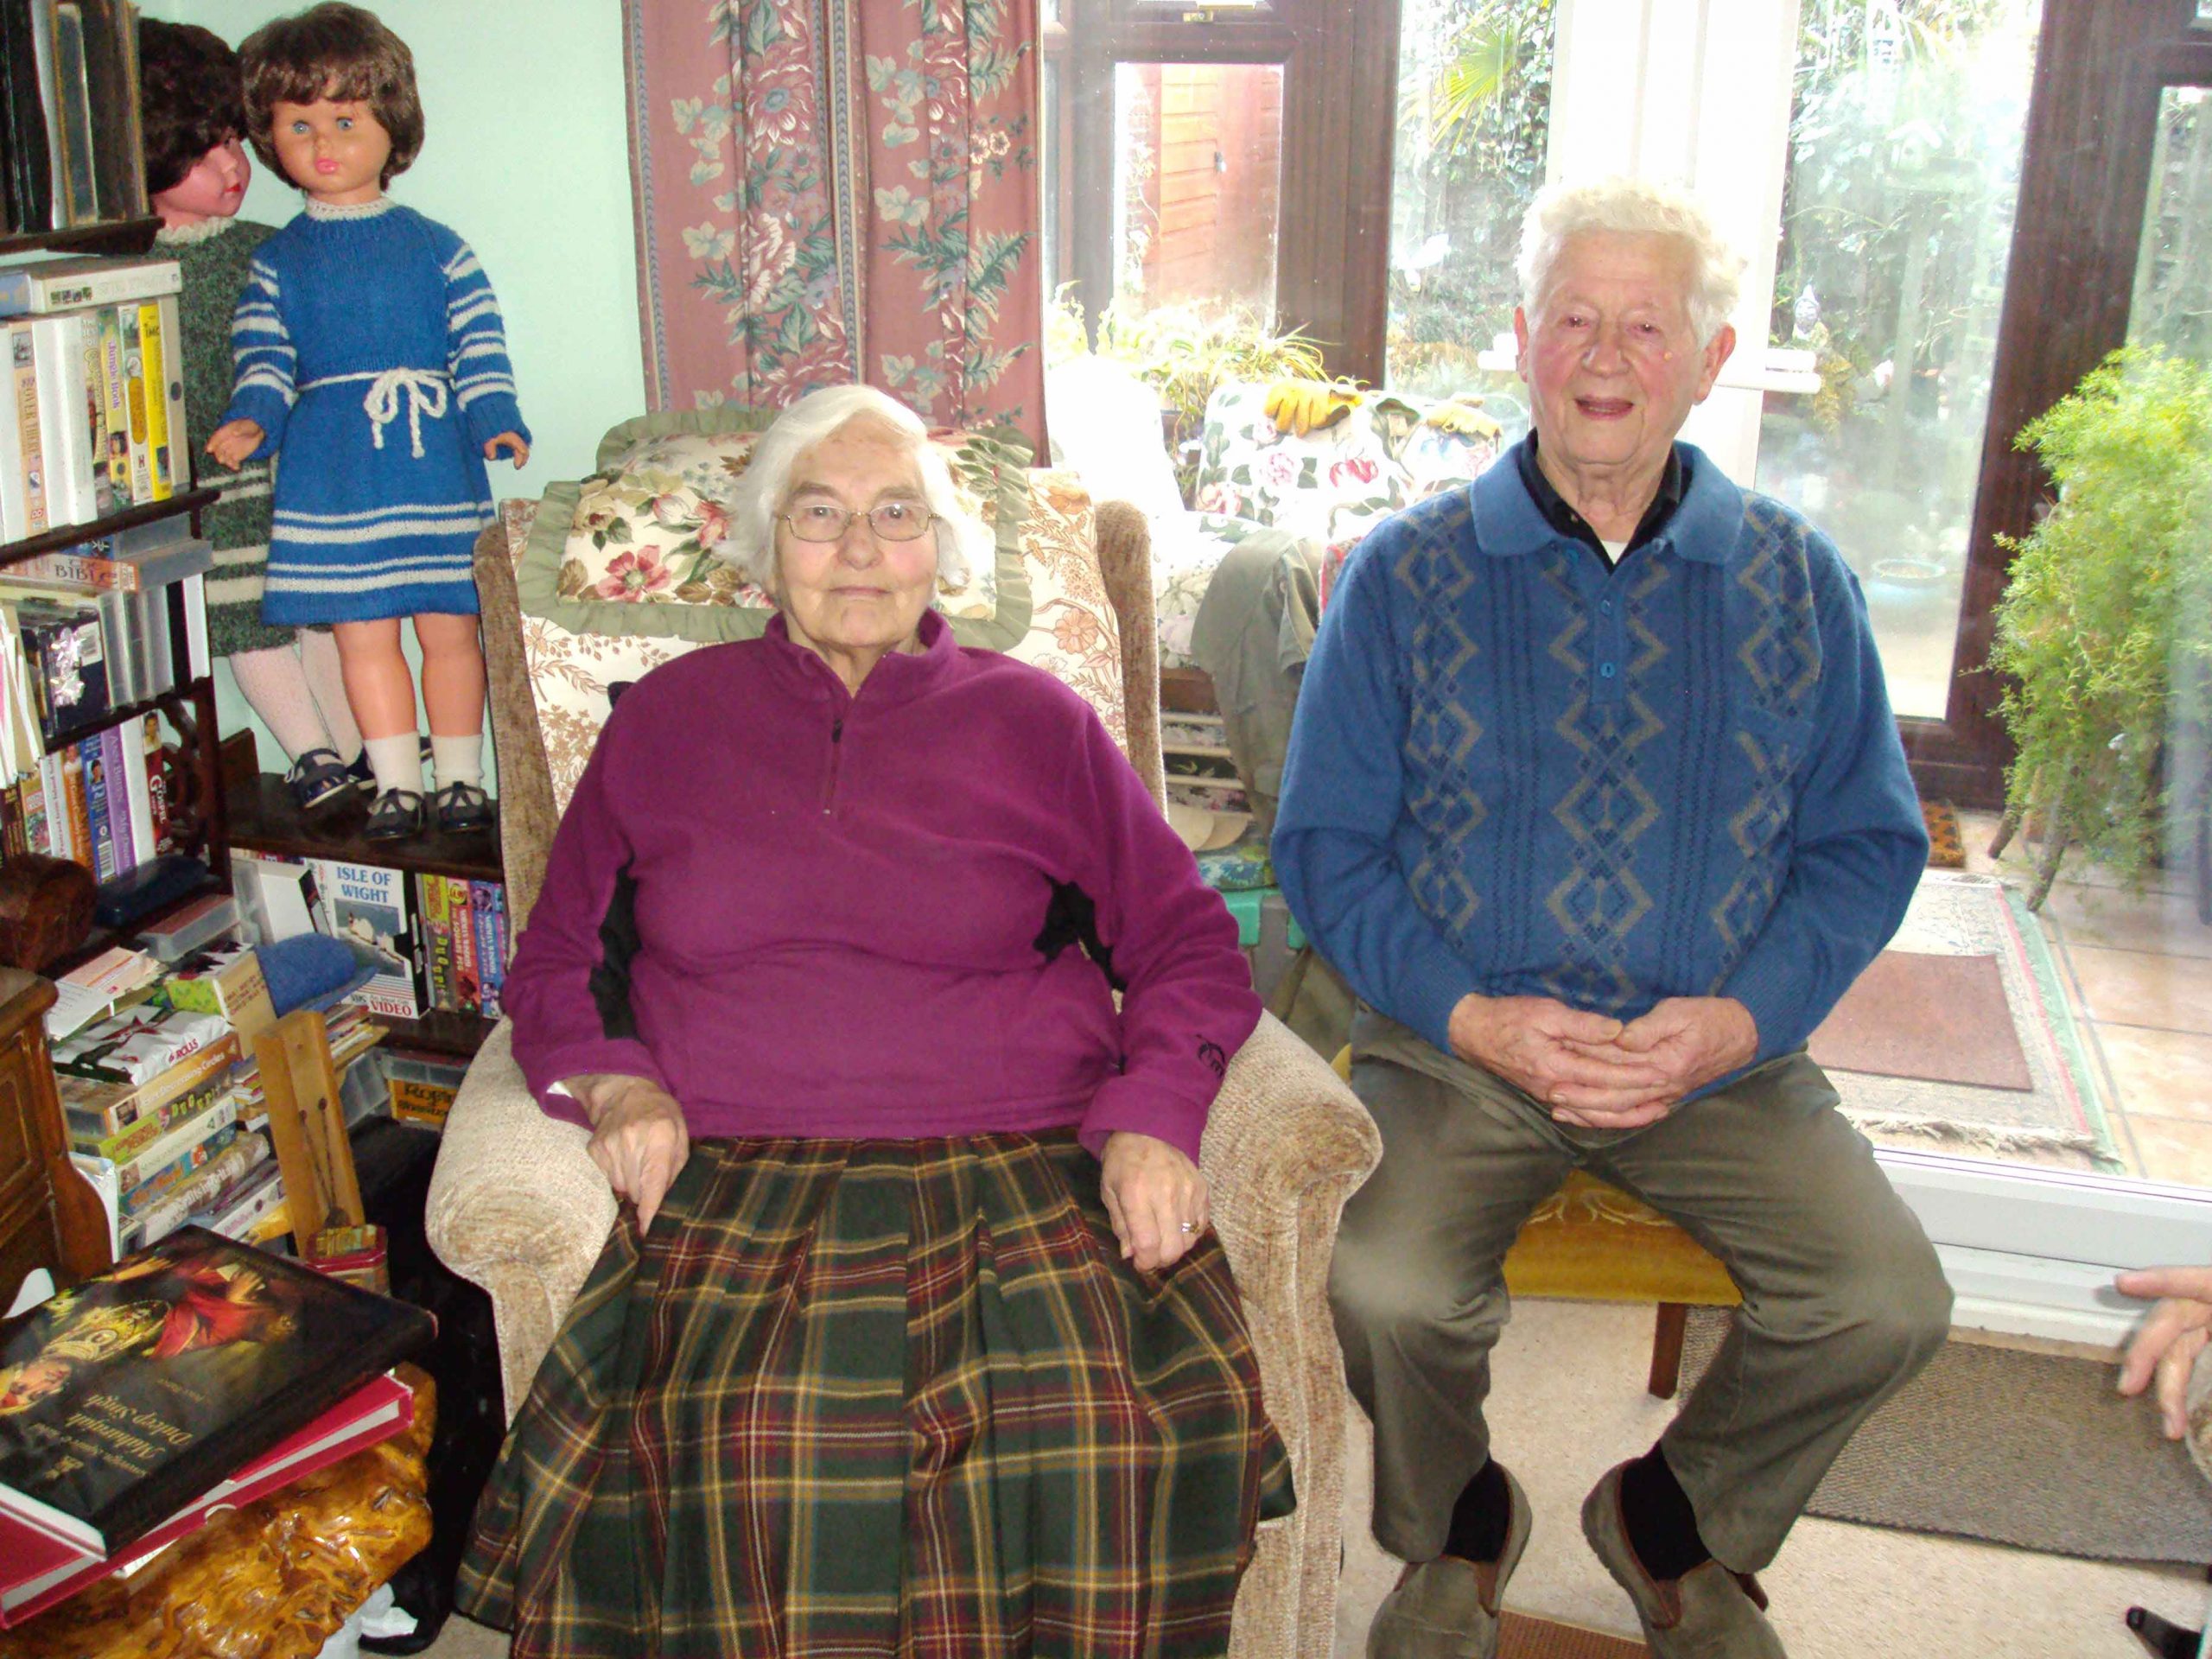 Doris & Oscar Kettle in 2011, ex- residents of Blo Norton who recalled the Princesses in the village